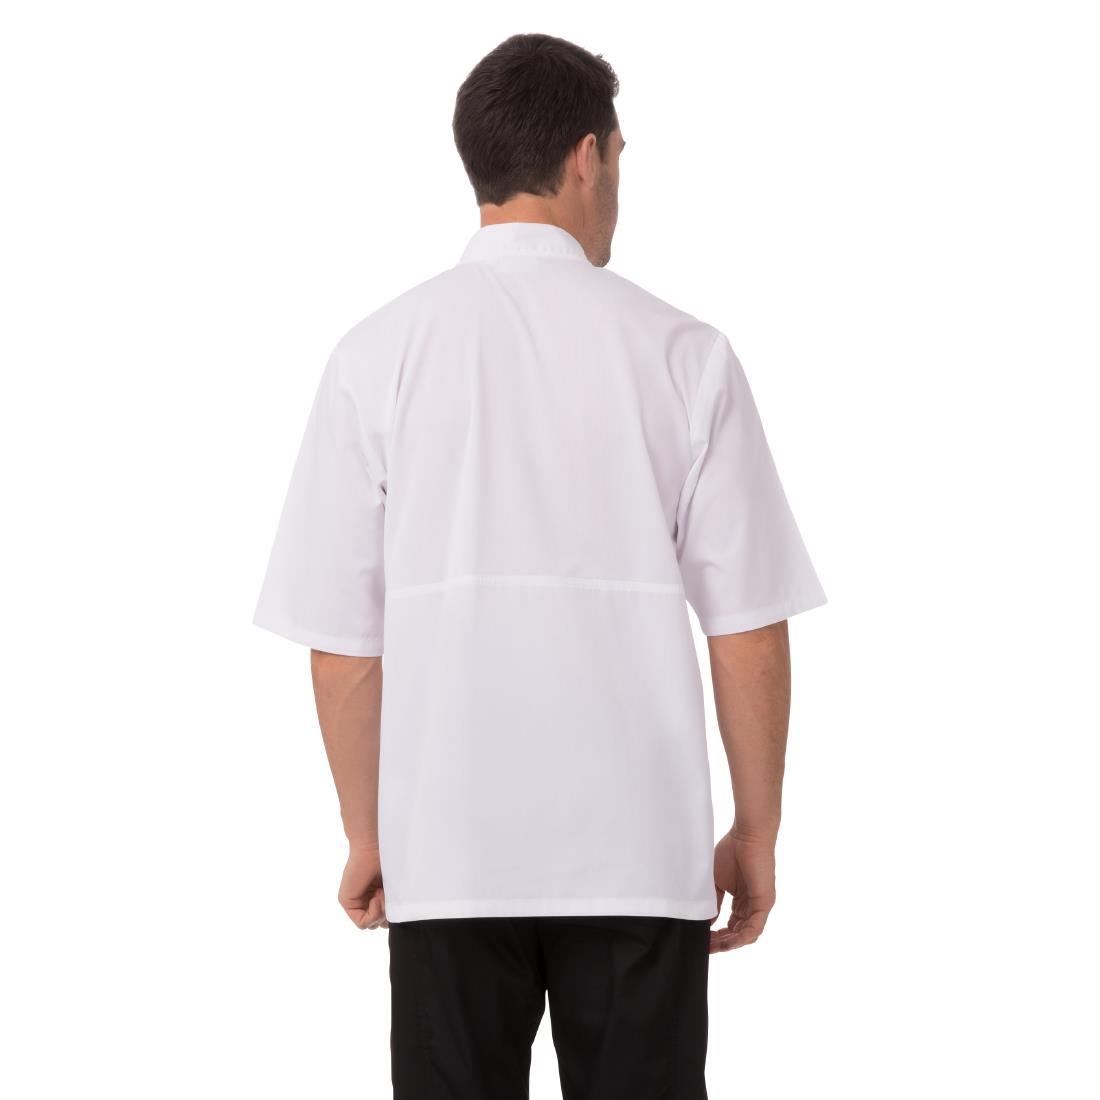 Chefs Works Montreal Cool Vent Unisex Short Sleeve Chefs Jacket White L - A914-L  - 3